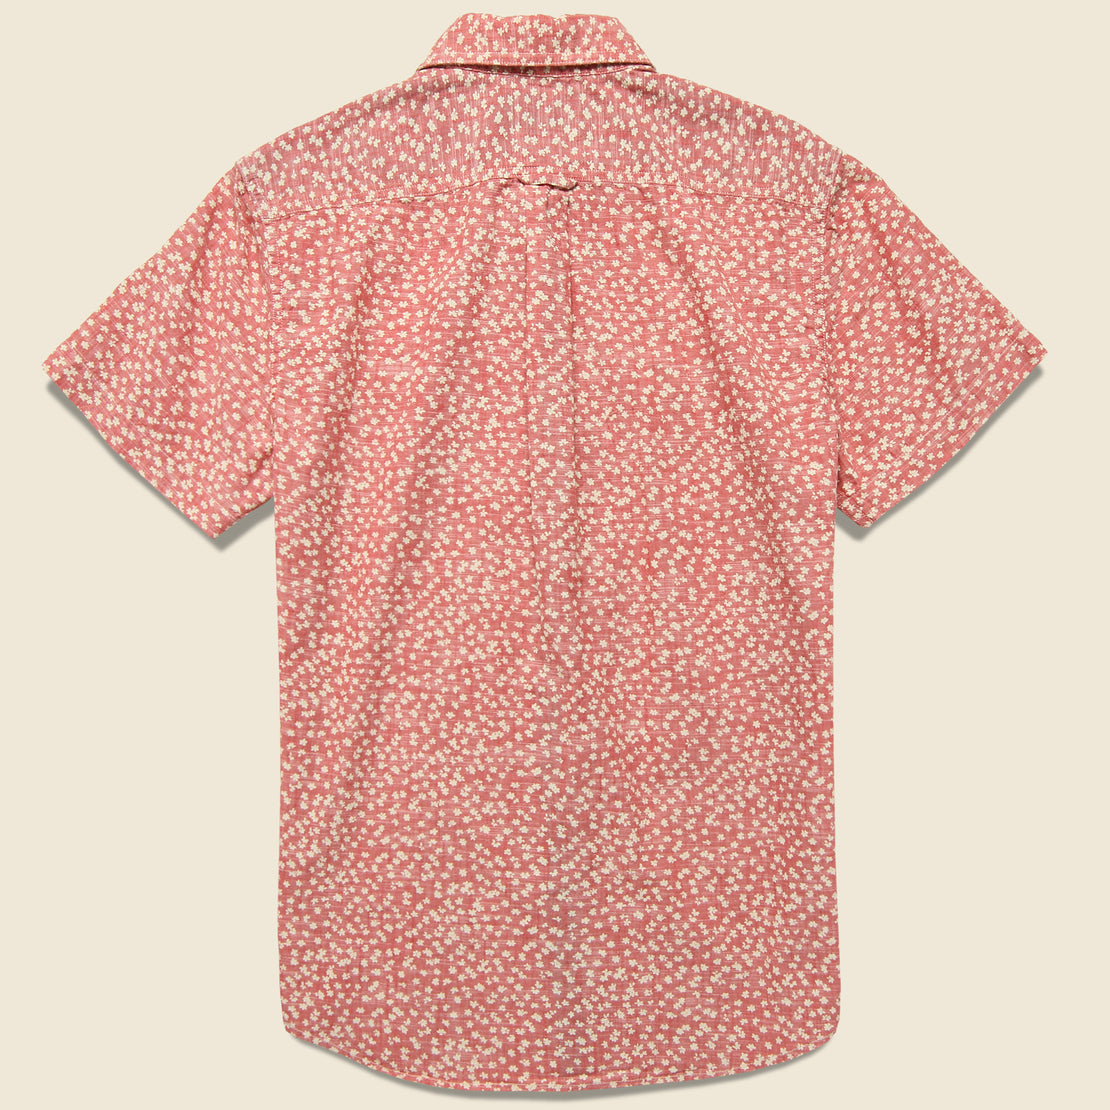 Drayton Shirt - Cranberry - Grayers - STAG Provisions - Tops - S/S Woven - Floral